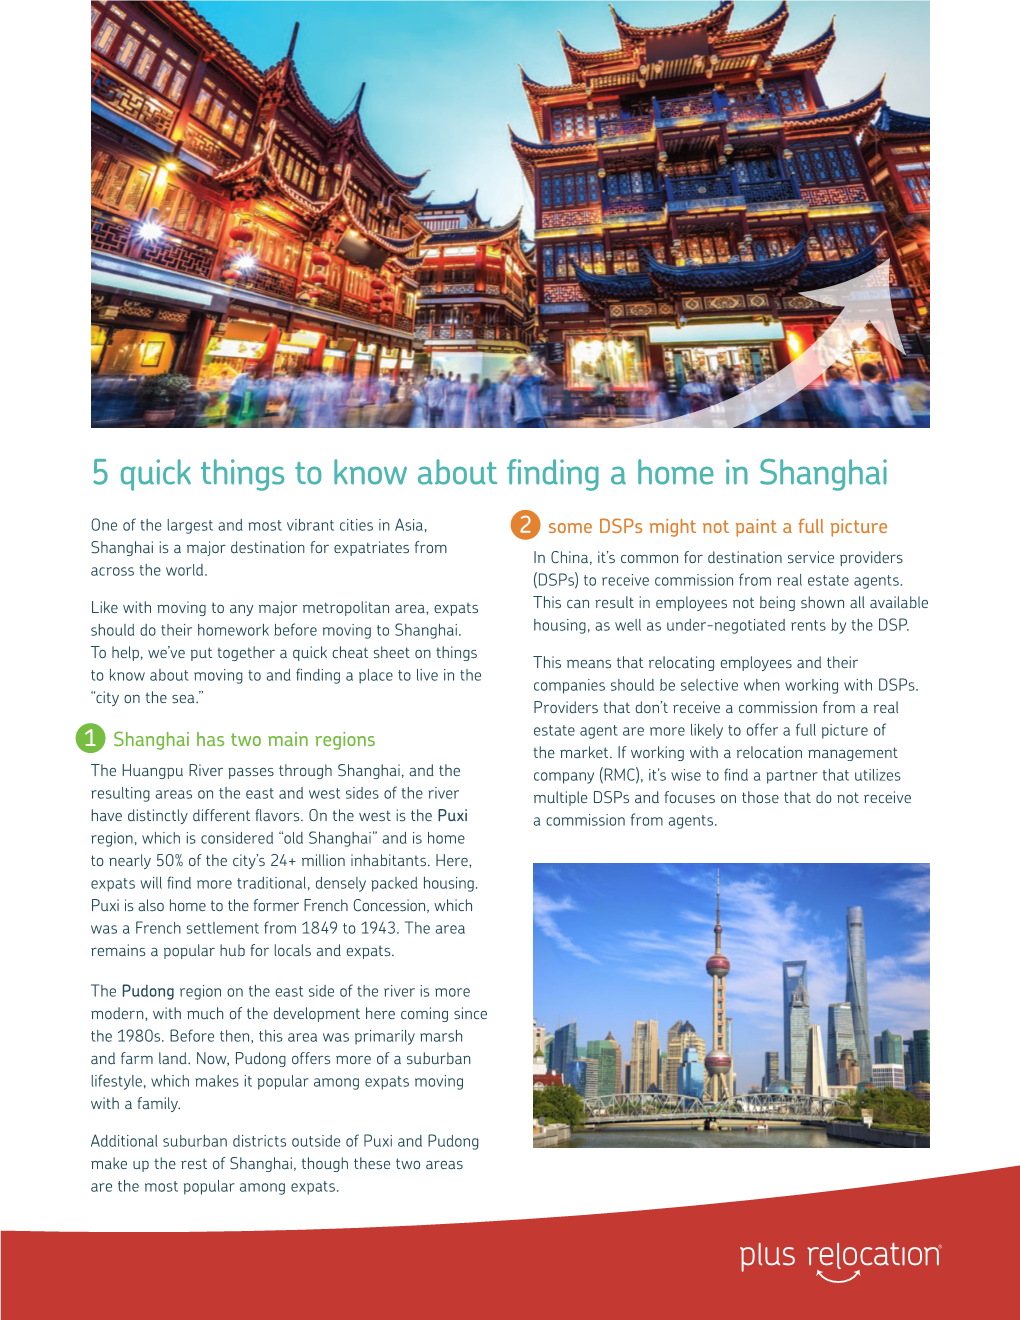 5 Quick Things to Know About Finding a Home in Shanghai